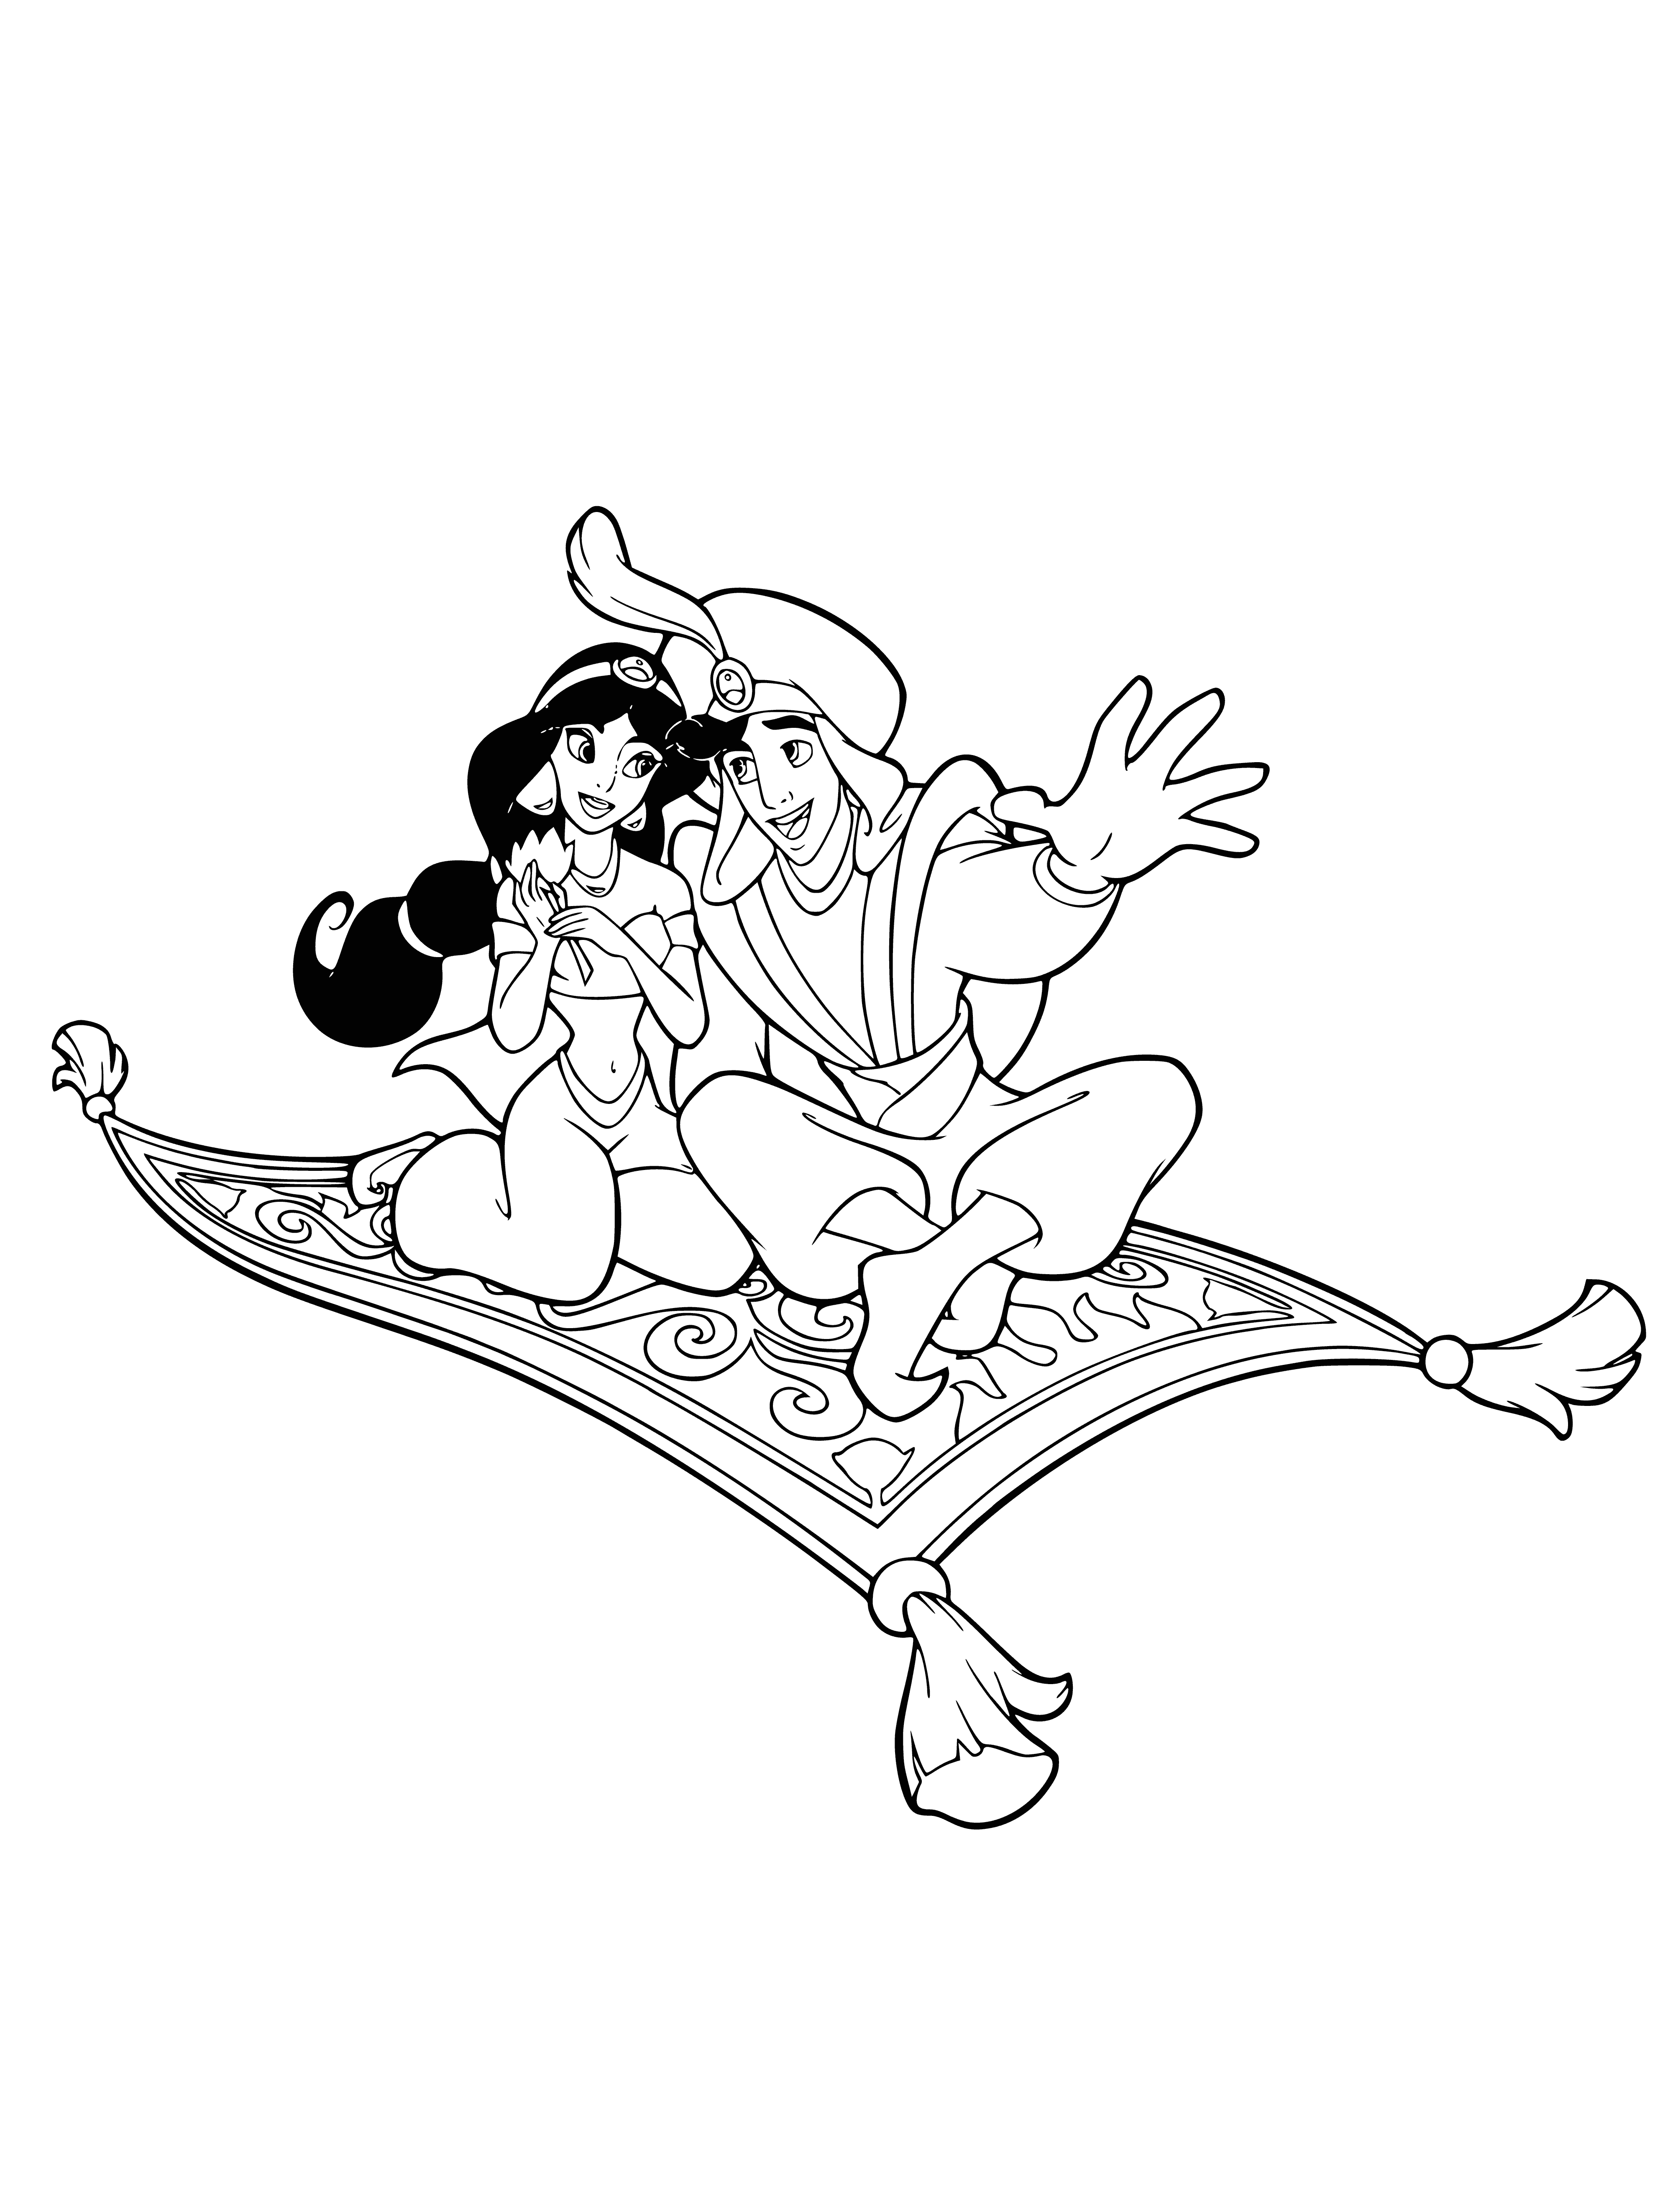 coloring page: Aladdin & Jasmine soar on a magic carpet in the starry night sky, embracing & beaming.